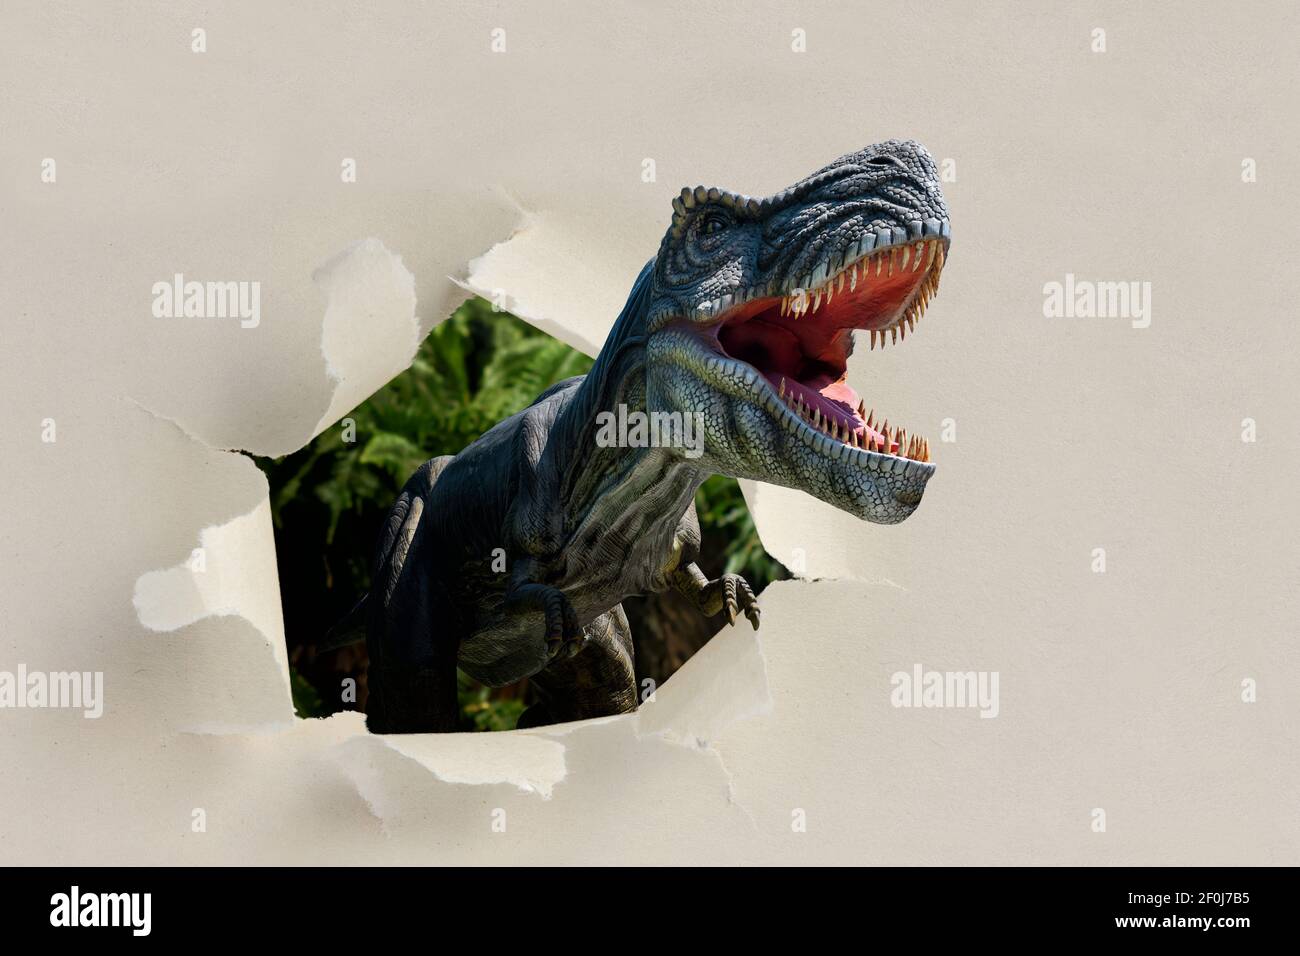 Closeup view of an angry T-Rex dinosaur figurine climbs out of torn paper. Monstrous animal with open mouth and sharp teeth Stock Photo